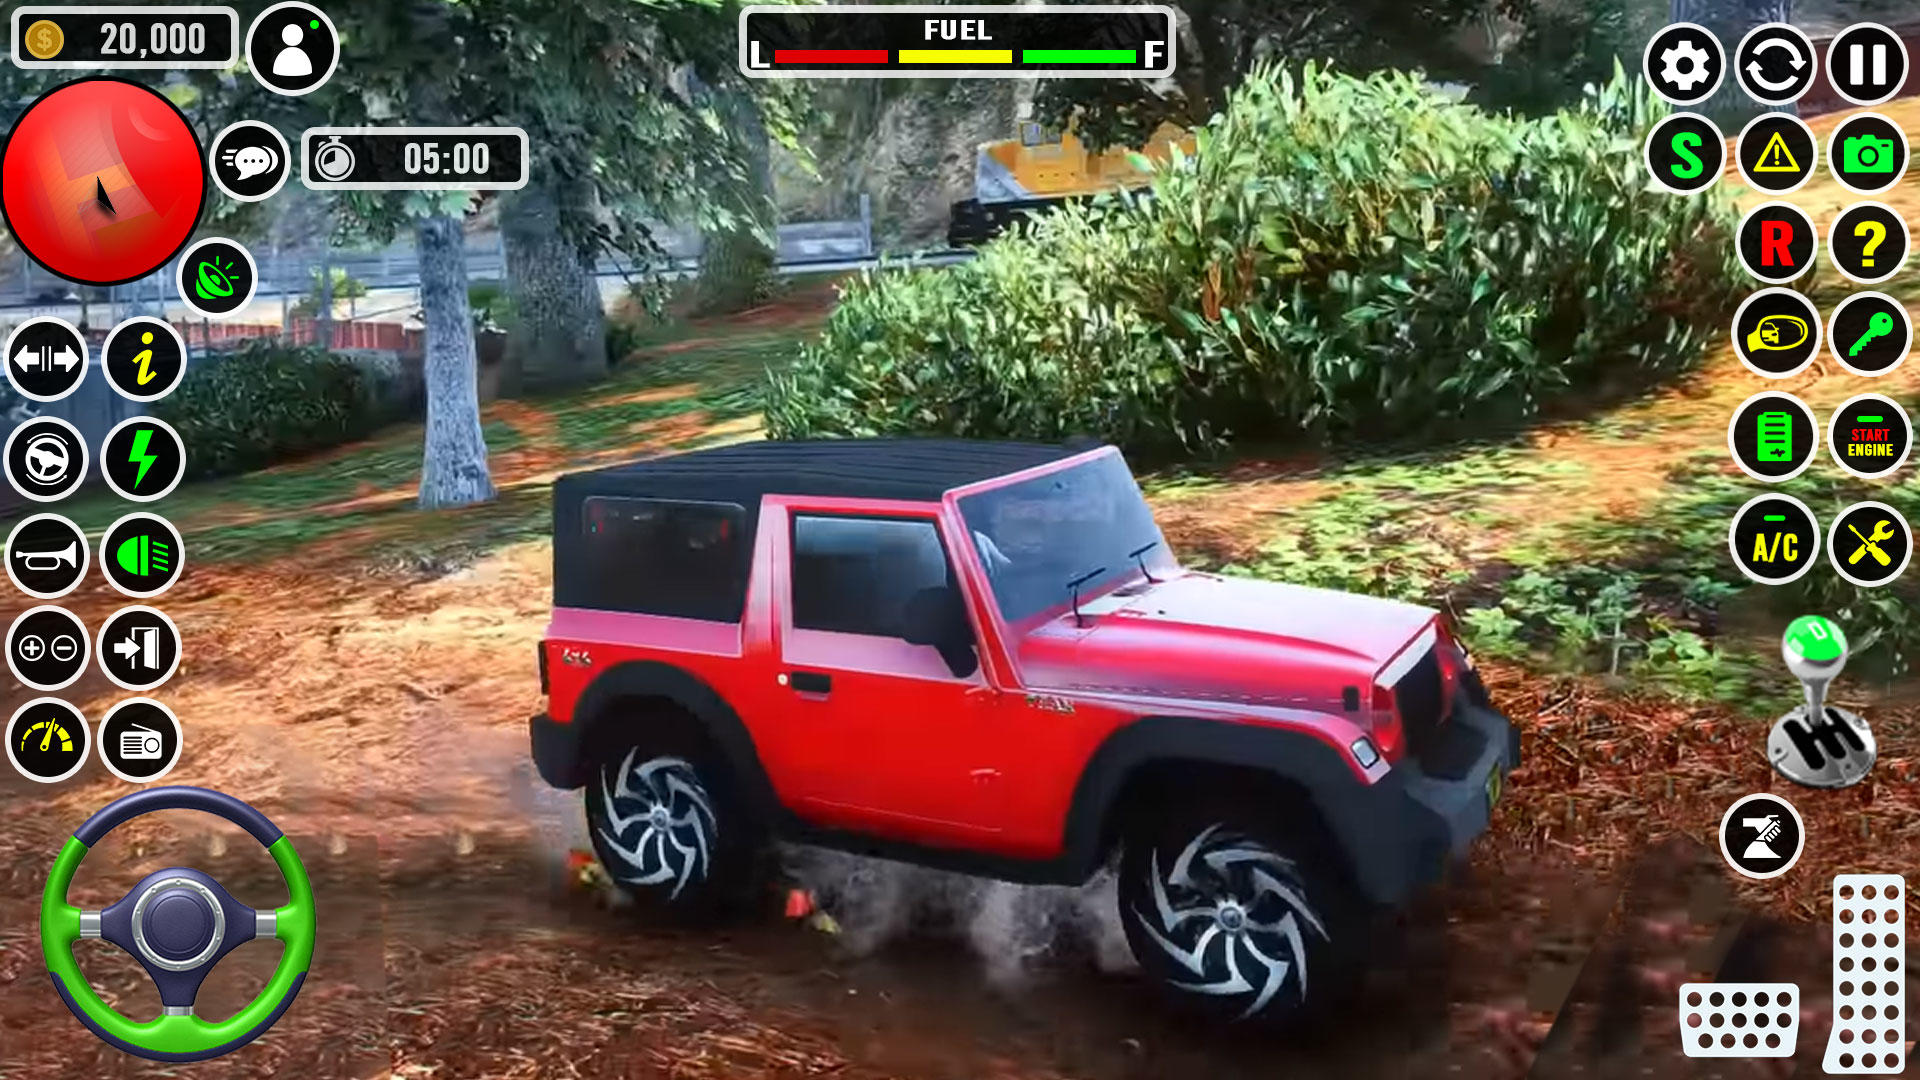 Offroad Jeep 4x4 Jeep Games screenshot game